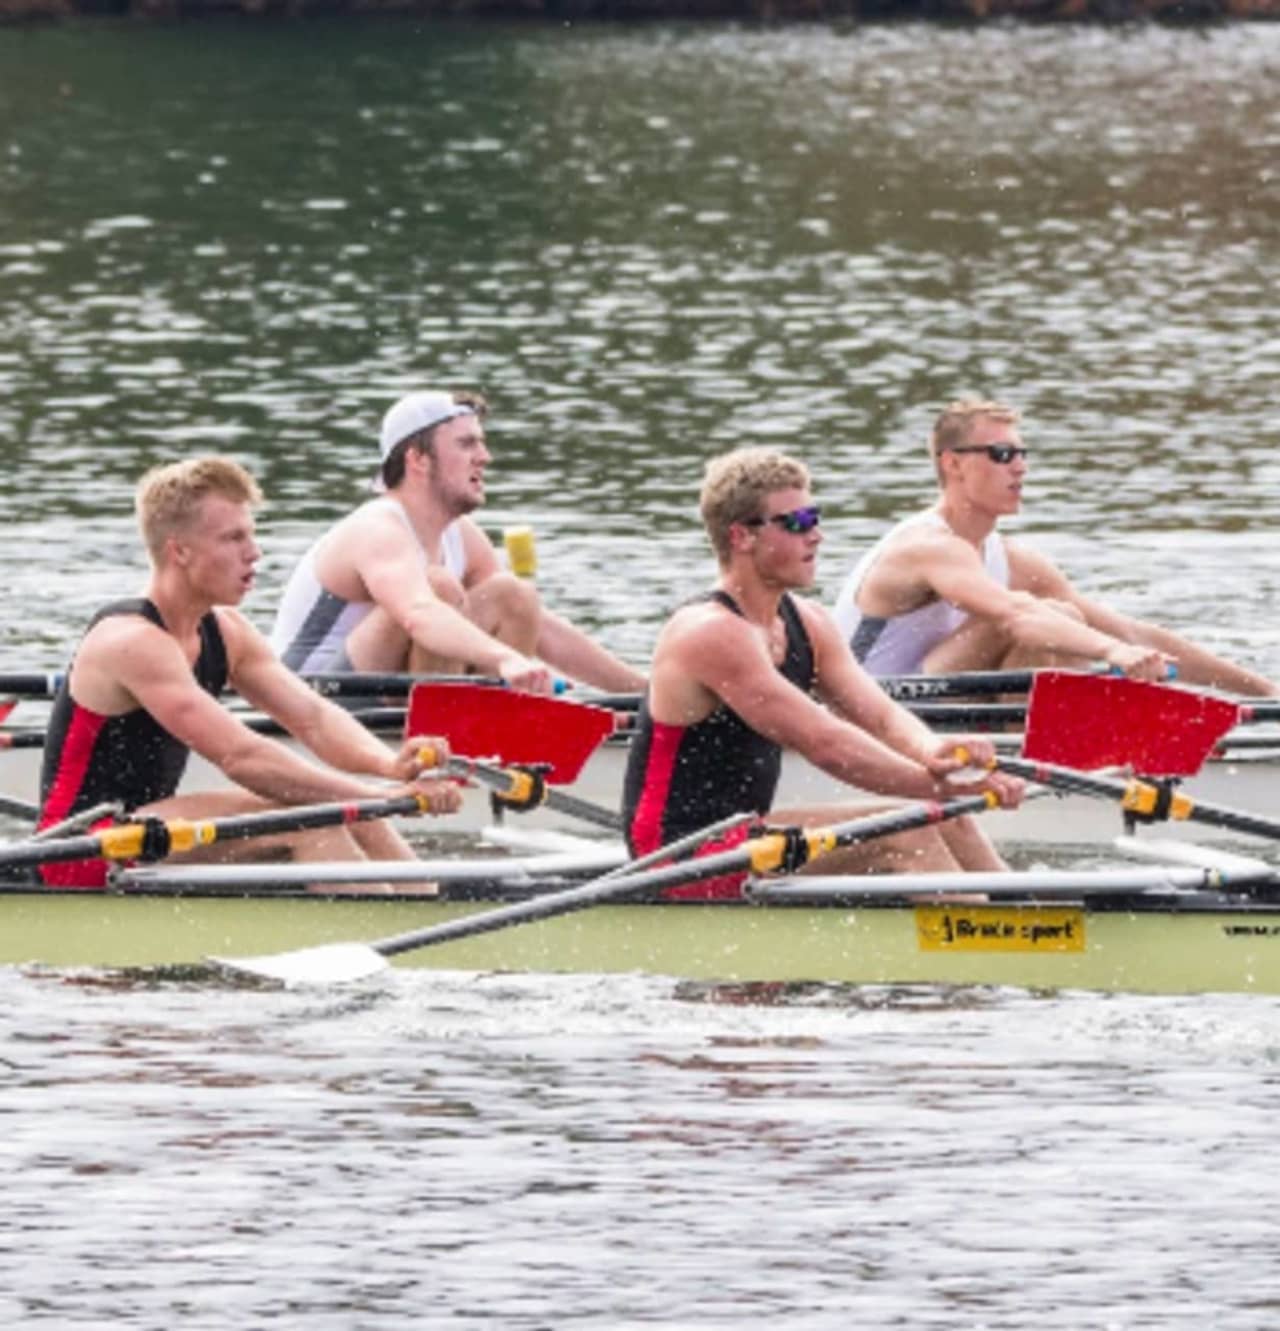 Joel Barlow High School senior Aidan Bridwell, seated second from right with his teammates, continues to rack up the gold medals at local regattas.